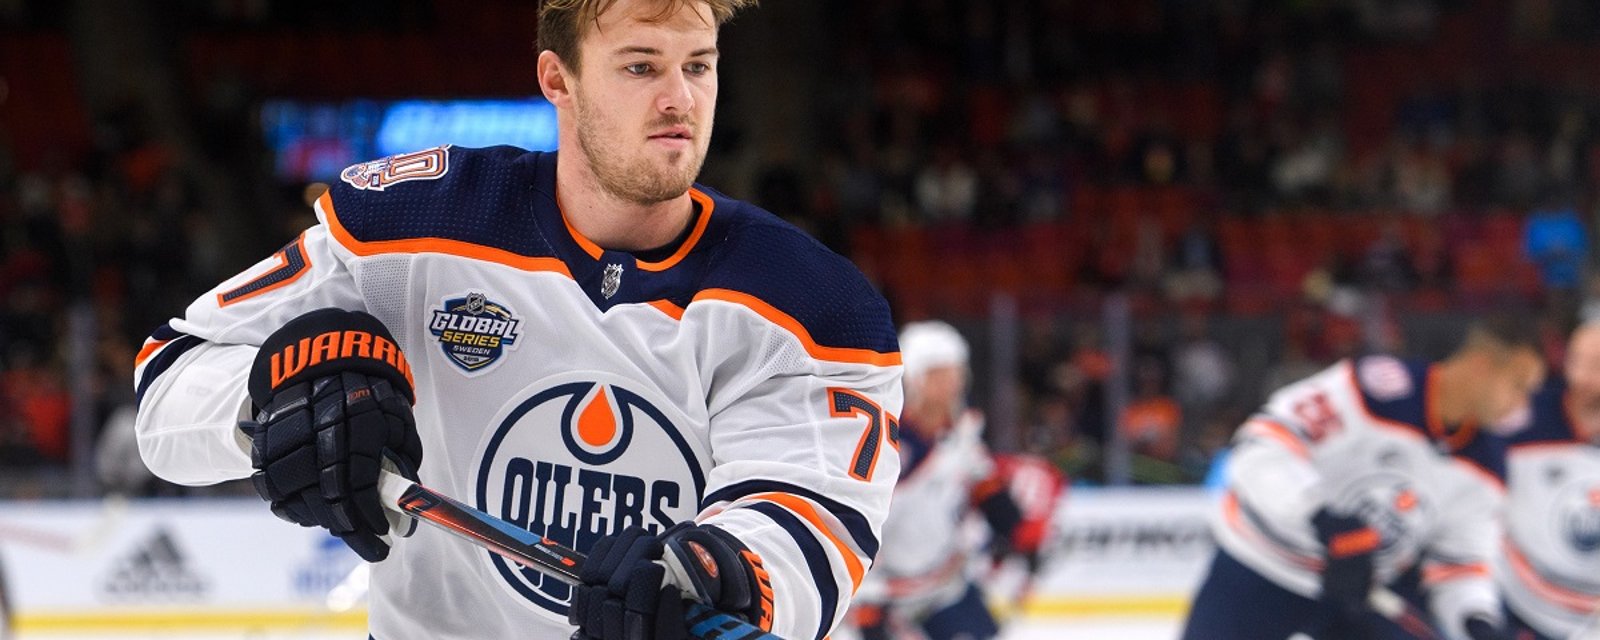 Oscar Klefbom likely out for a while and it sounds pretty serious.